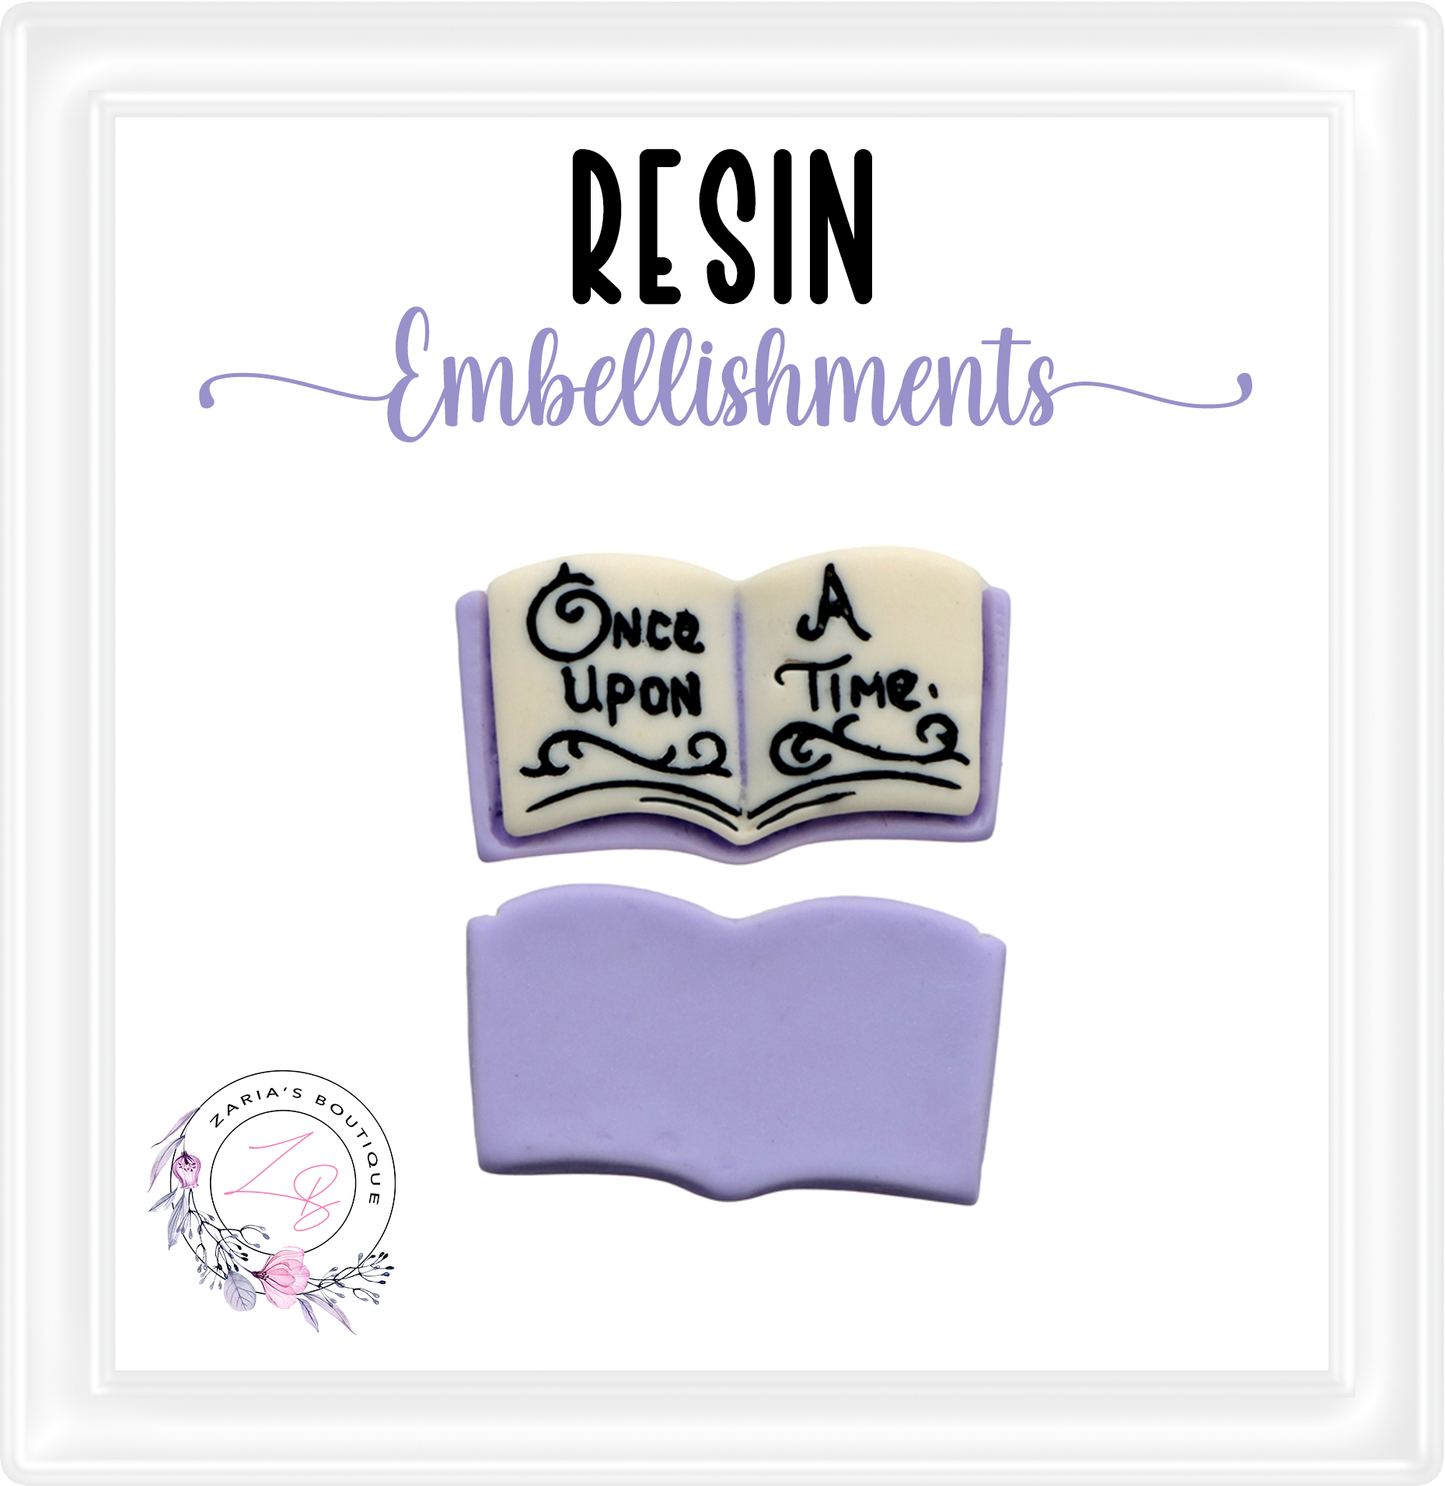 ⋅ Storybook Embellishments ⋅ 2 pieces ⋅